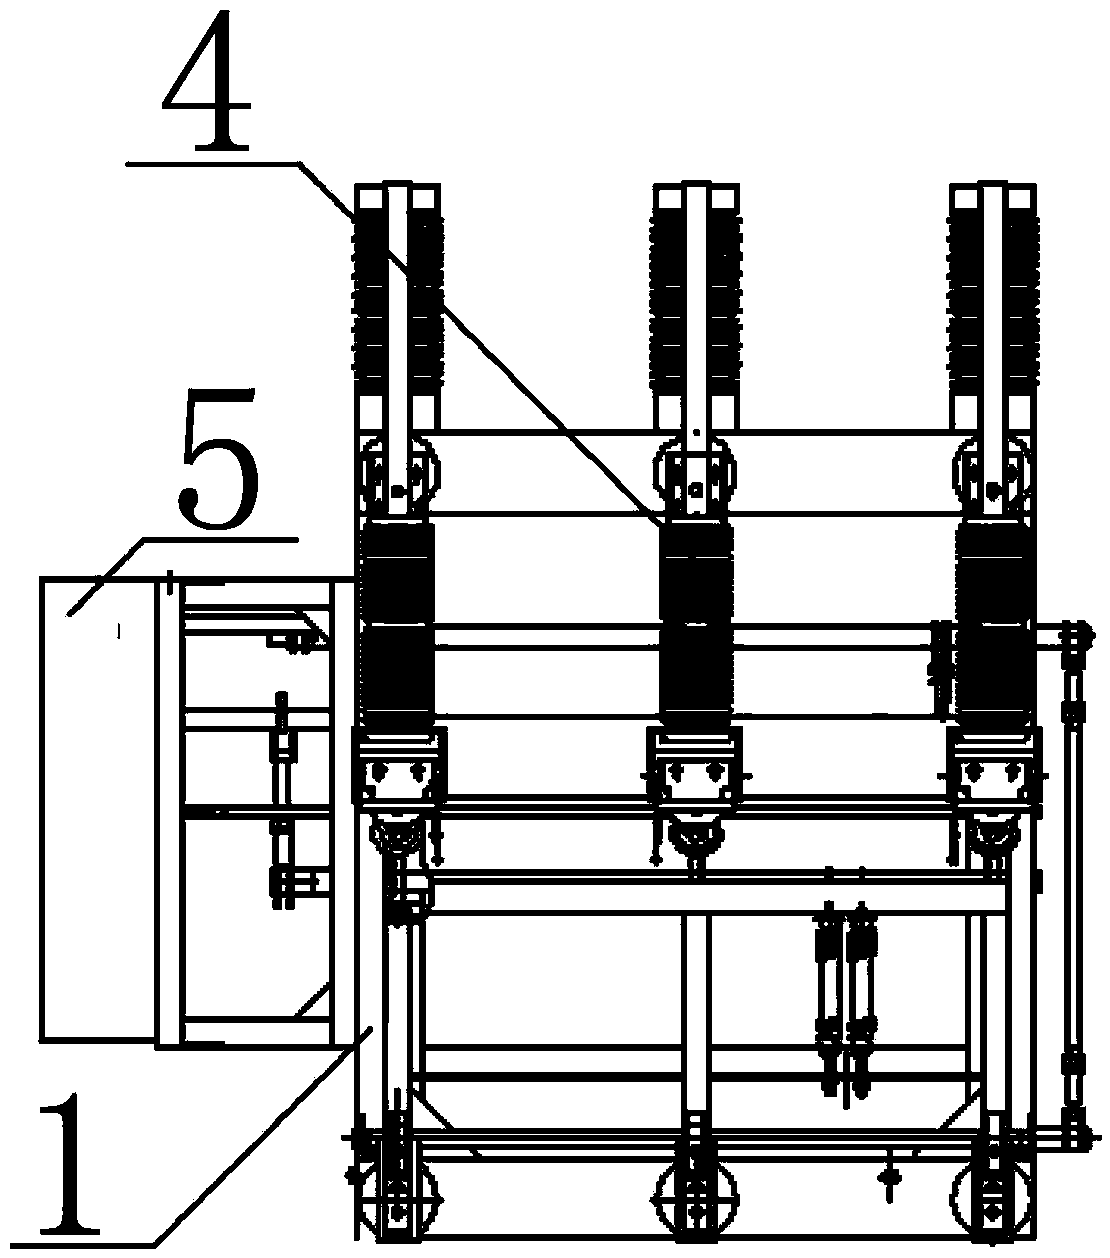 Indoor high-voltage vacuum load switch-fuse combined electrical apparatus